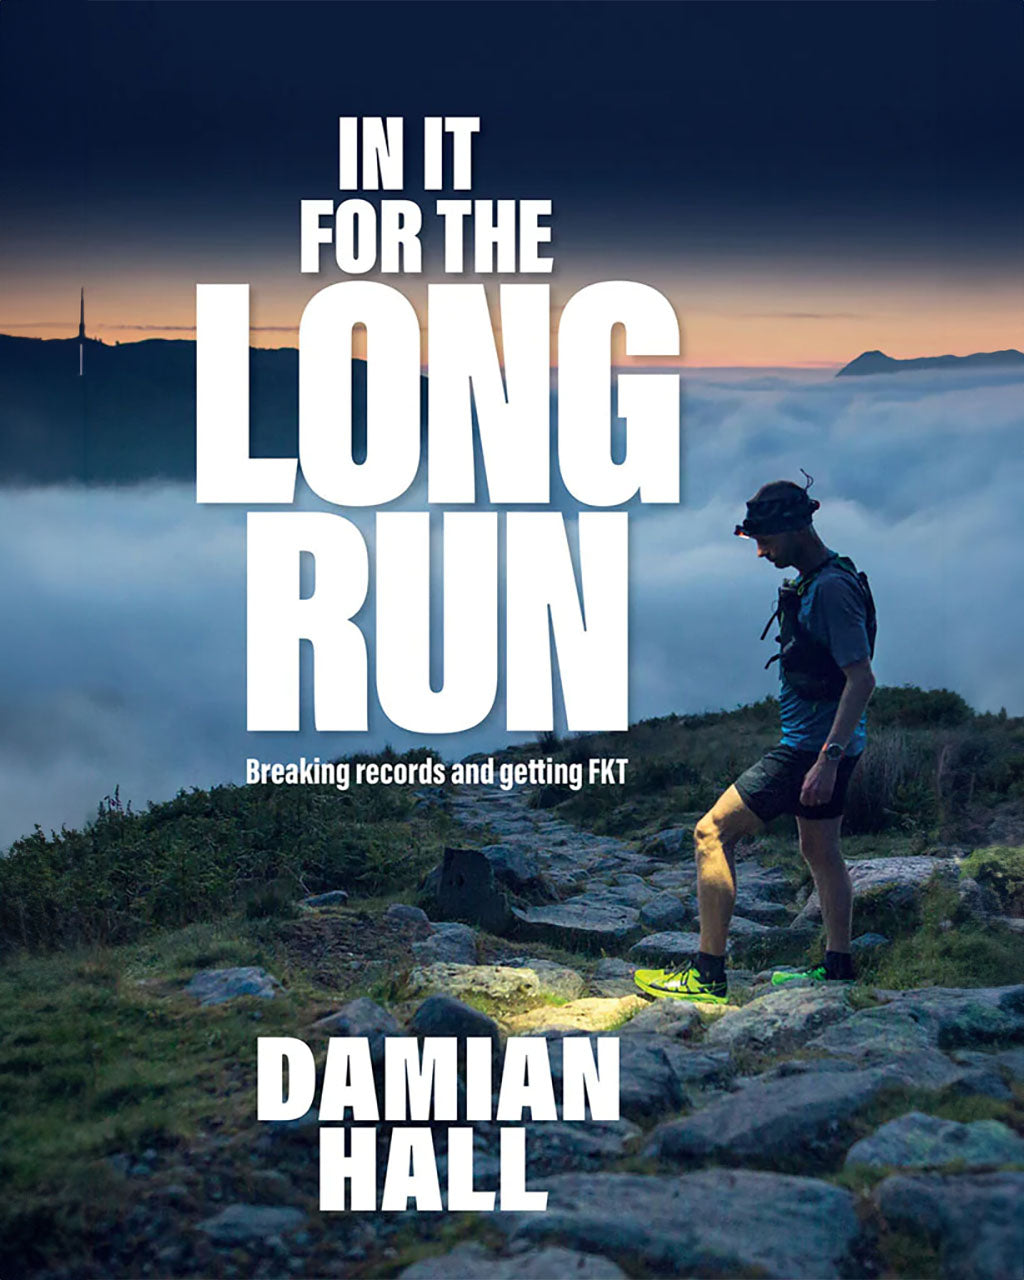 In It For The Long Run by Damian Hall